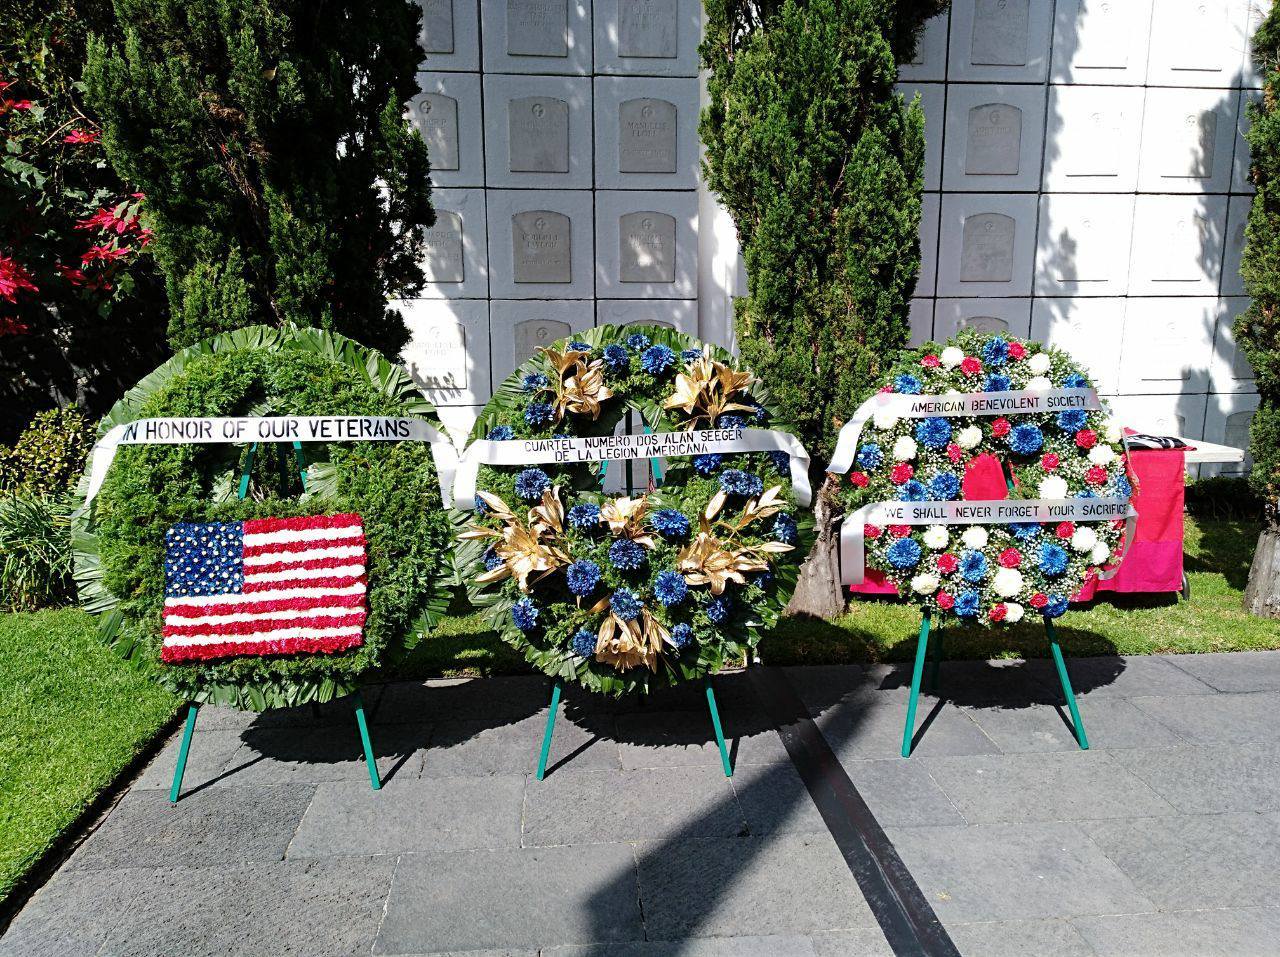 Three large floral wreaths on stands in front of the crypt. 